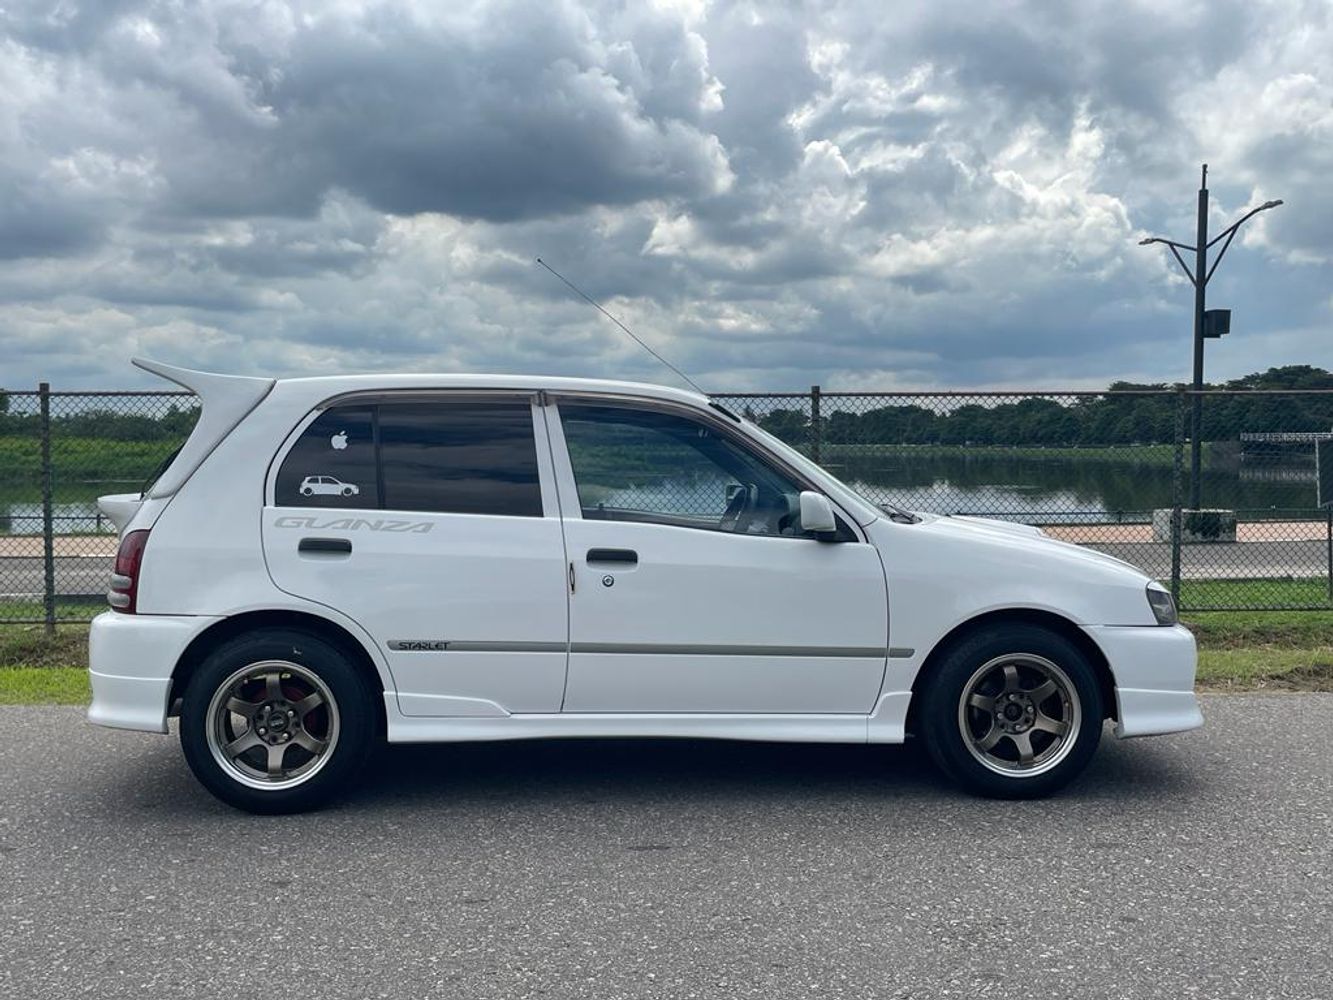 Toyota Starlet 1997 Review